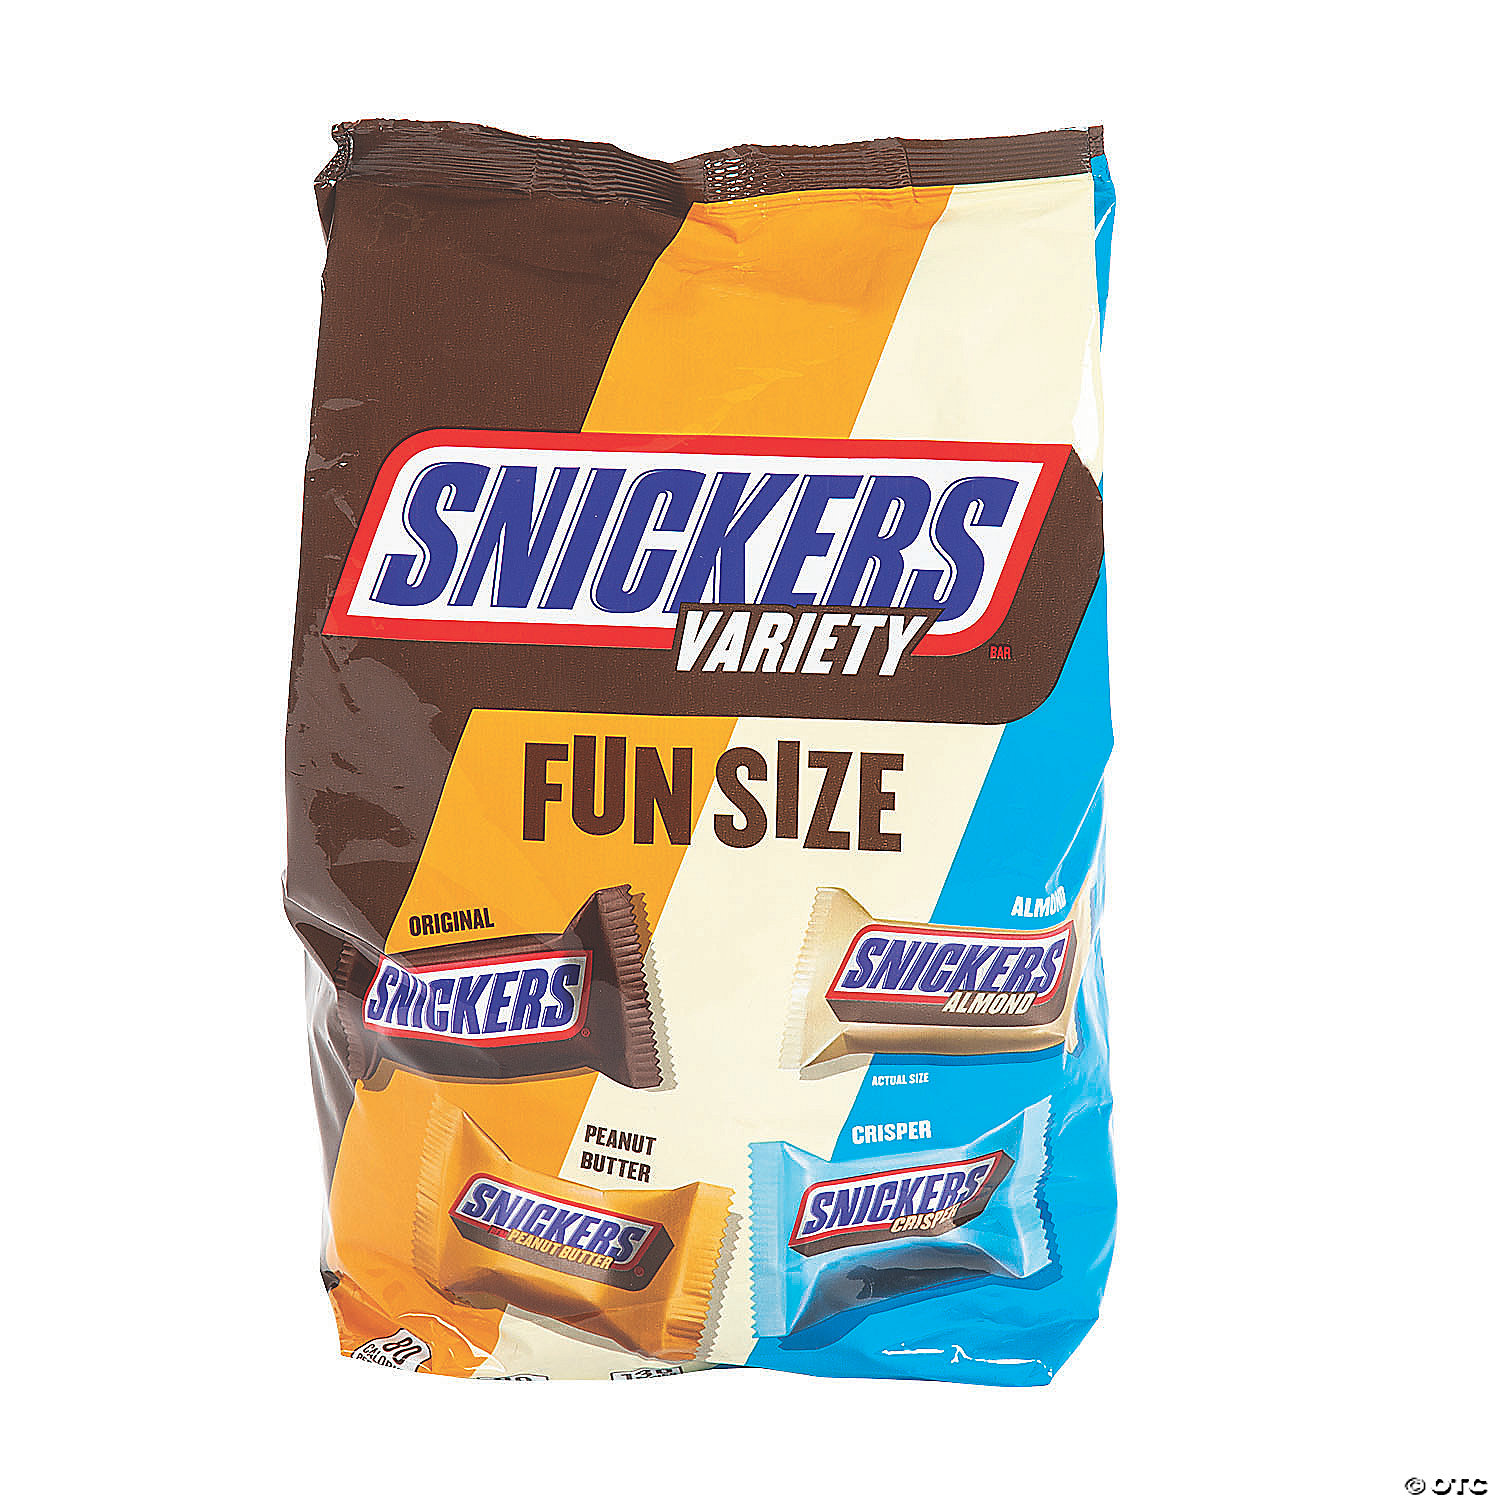 Snickers Almonds – CandyMix